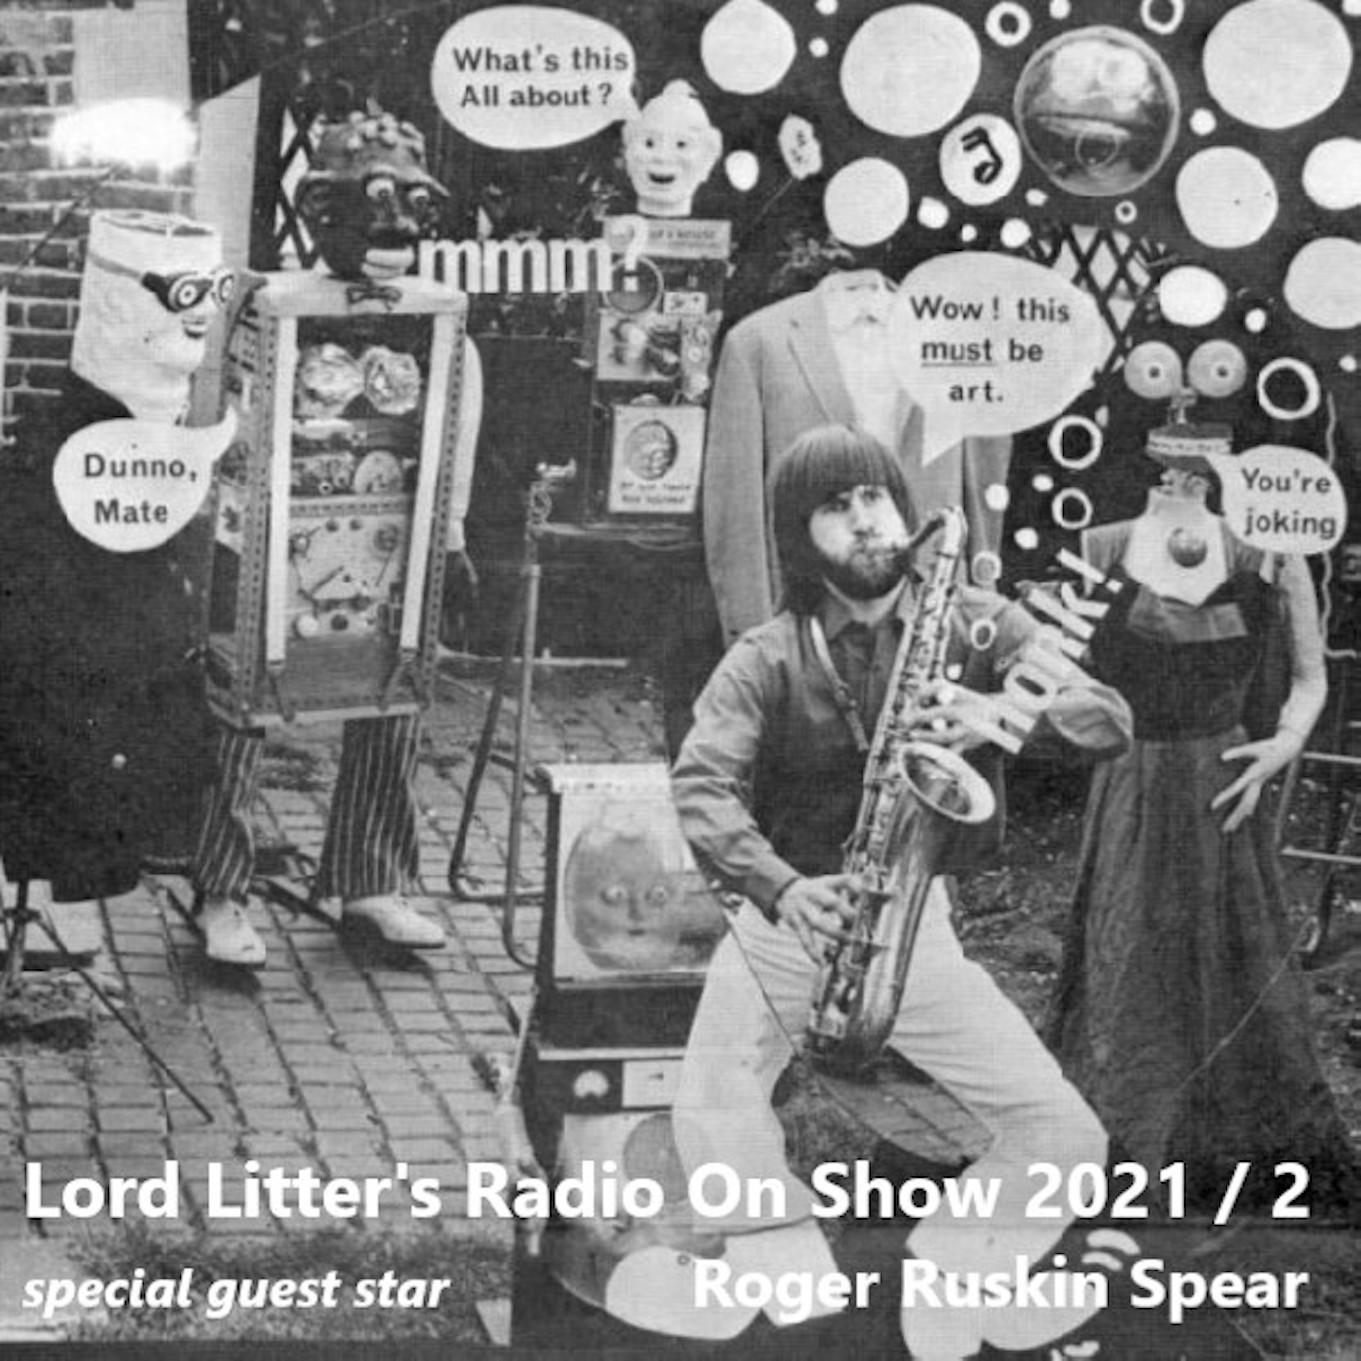 Lord Litter’s Radio On Show – ft. Roger Ruskin Spear special